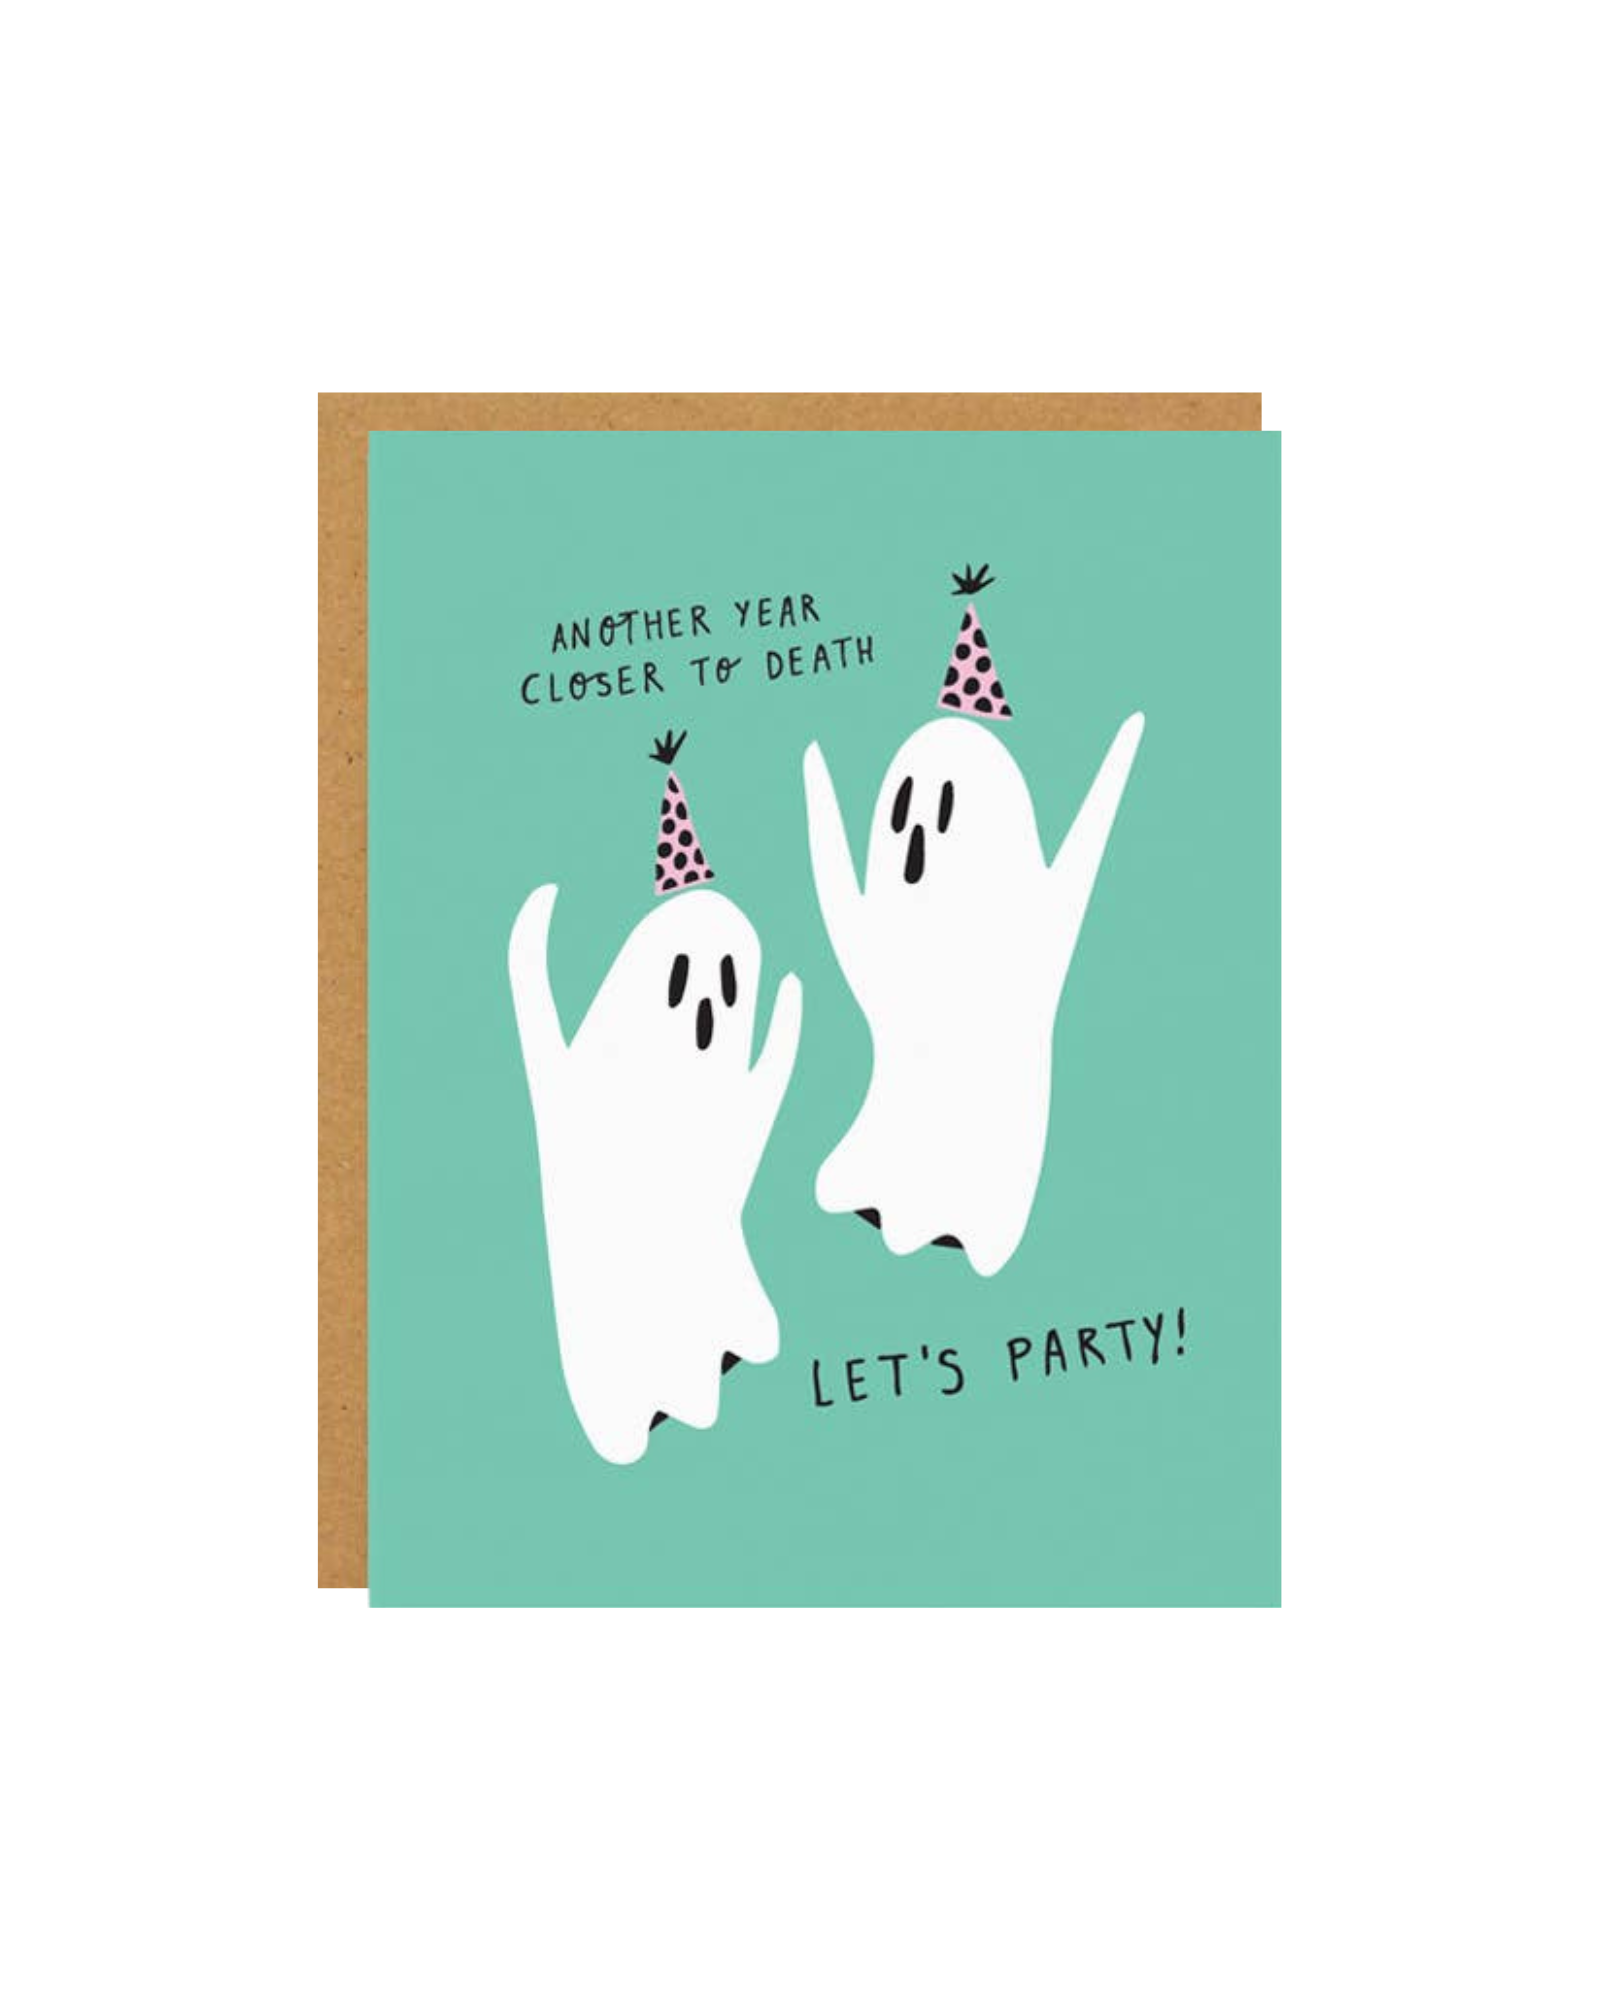 Mint green greeting card and kraft envelope, two ghosts in center with hand written text "another year closer to death"